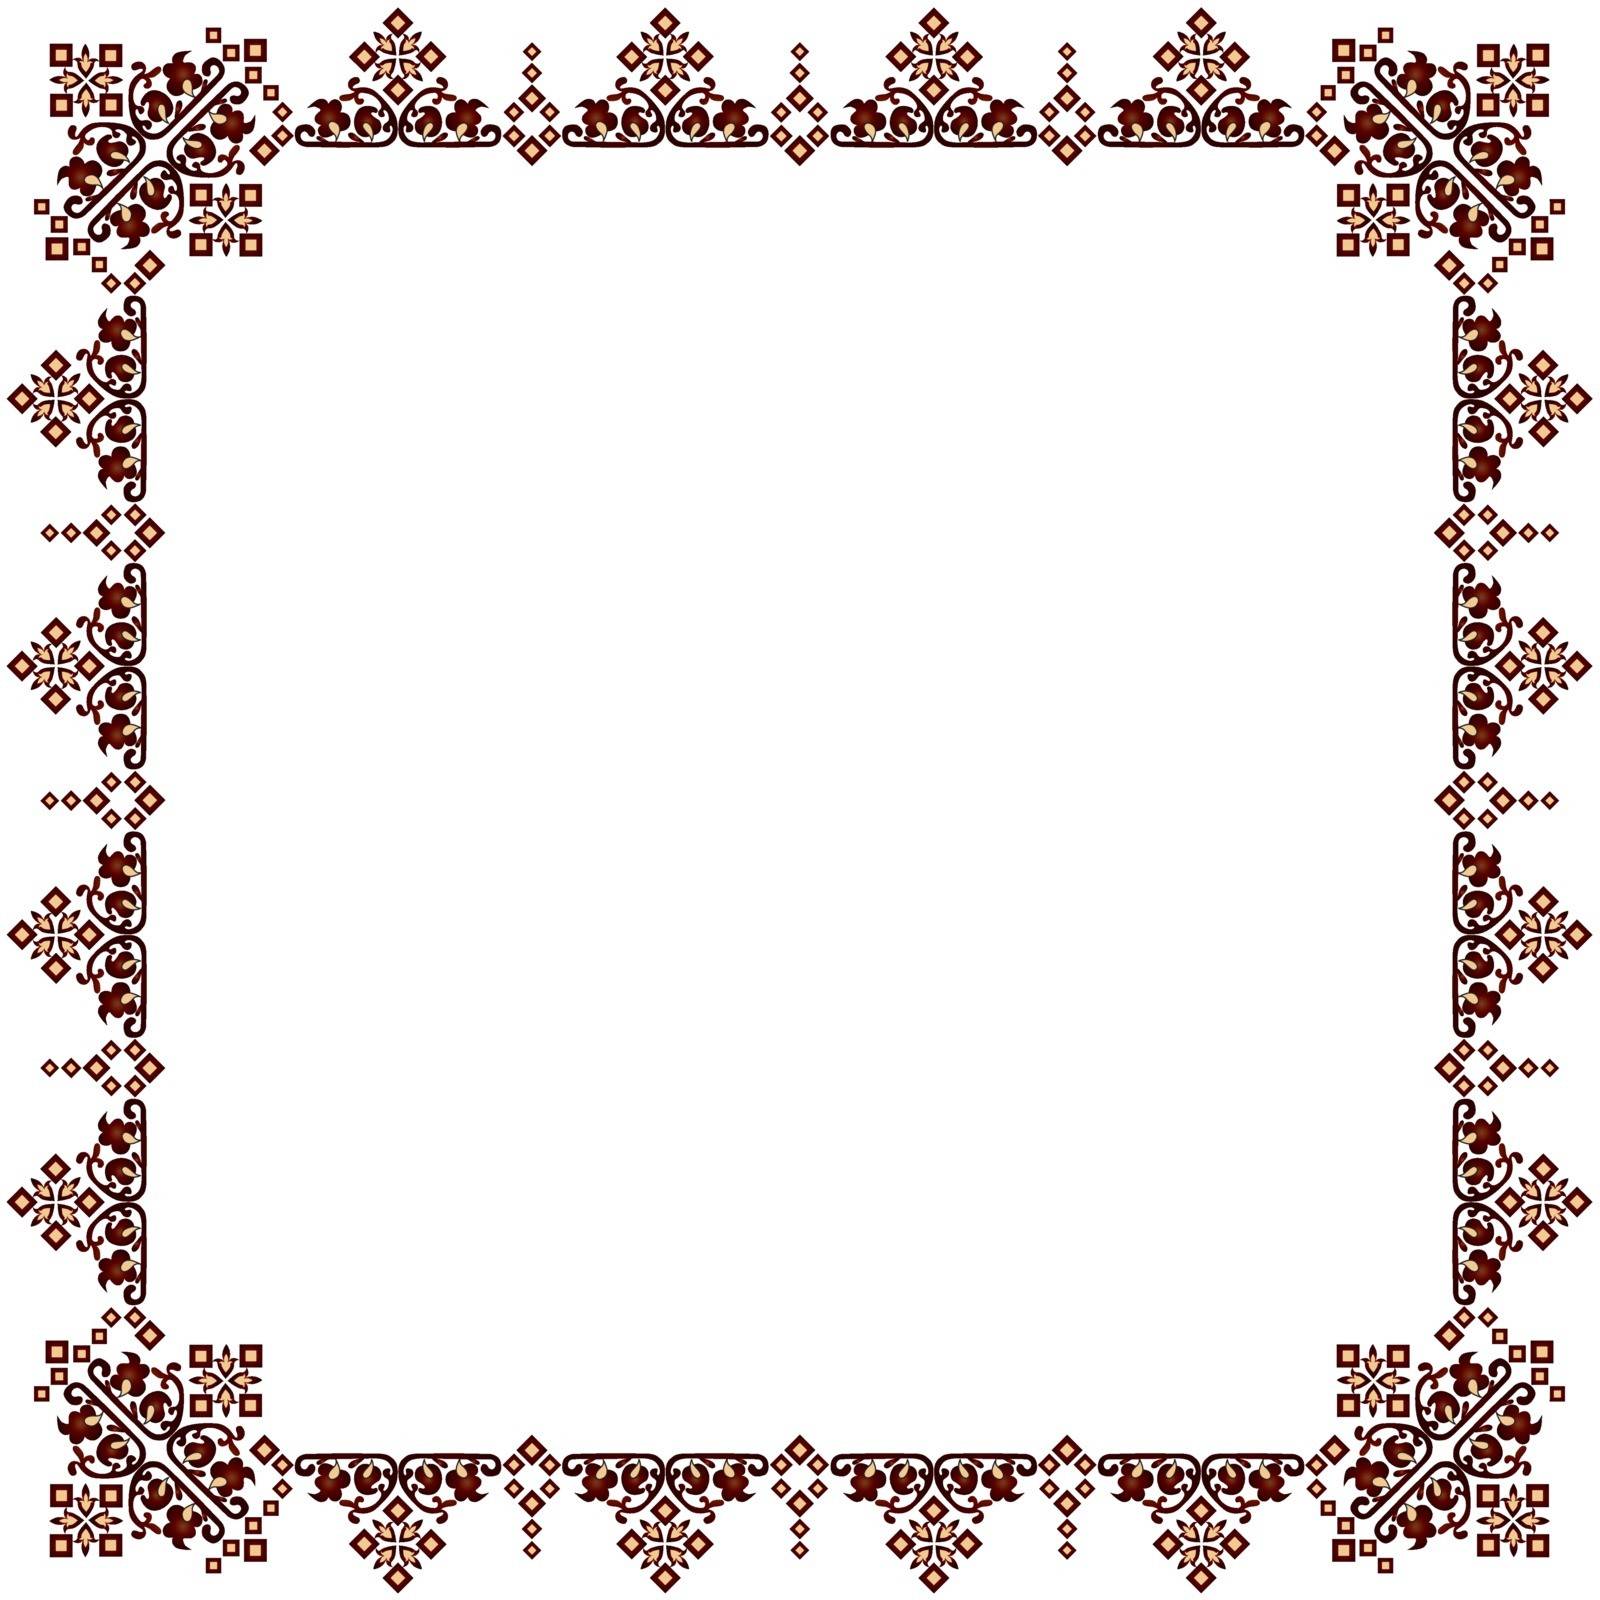 Decorative frame pattern drawn in the old style